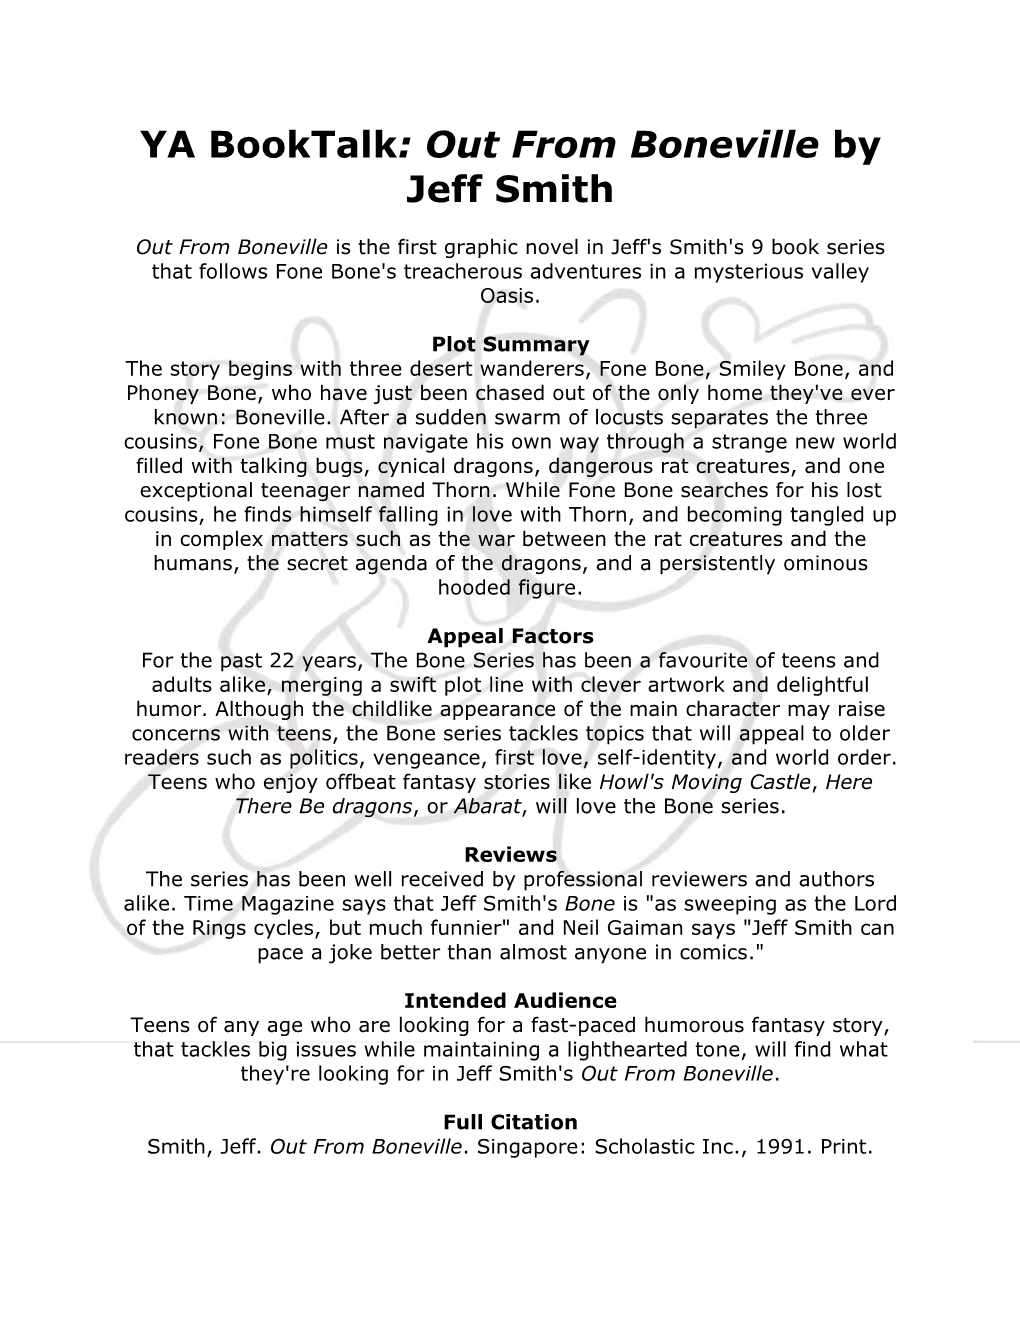 YA Booktalk: out from Boneville by Jeff Smith